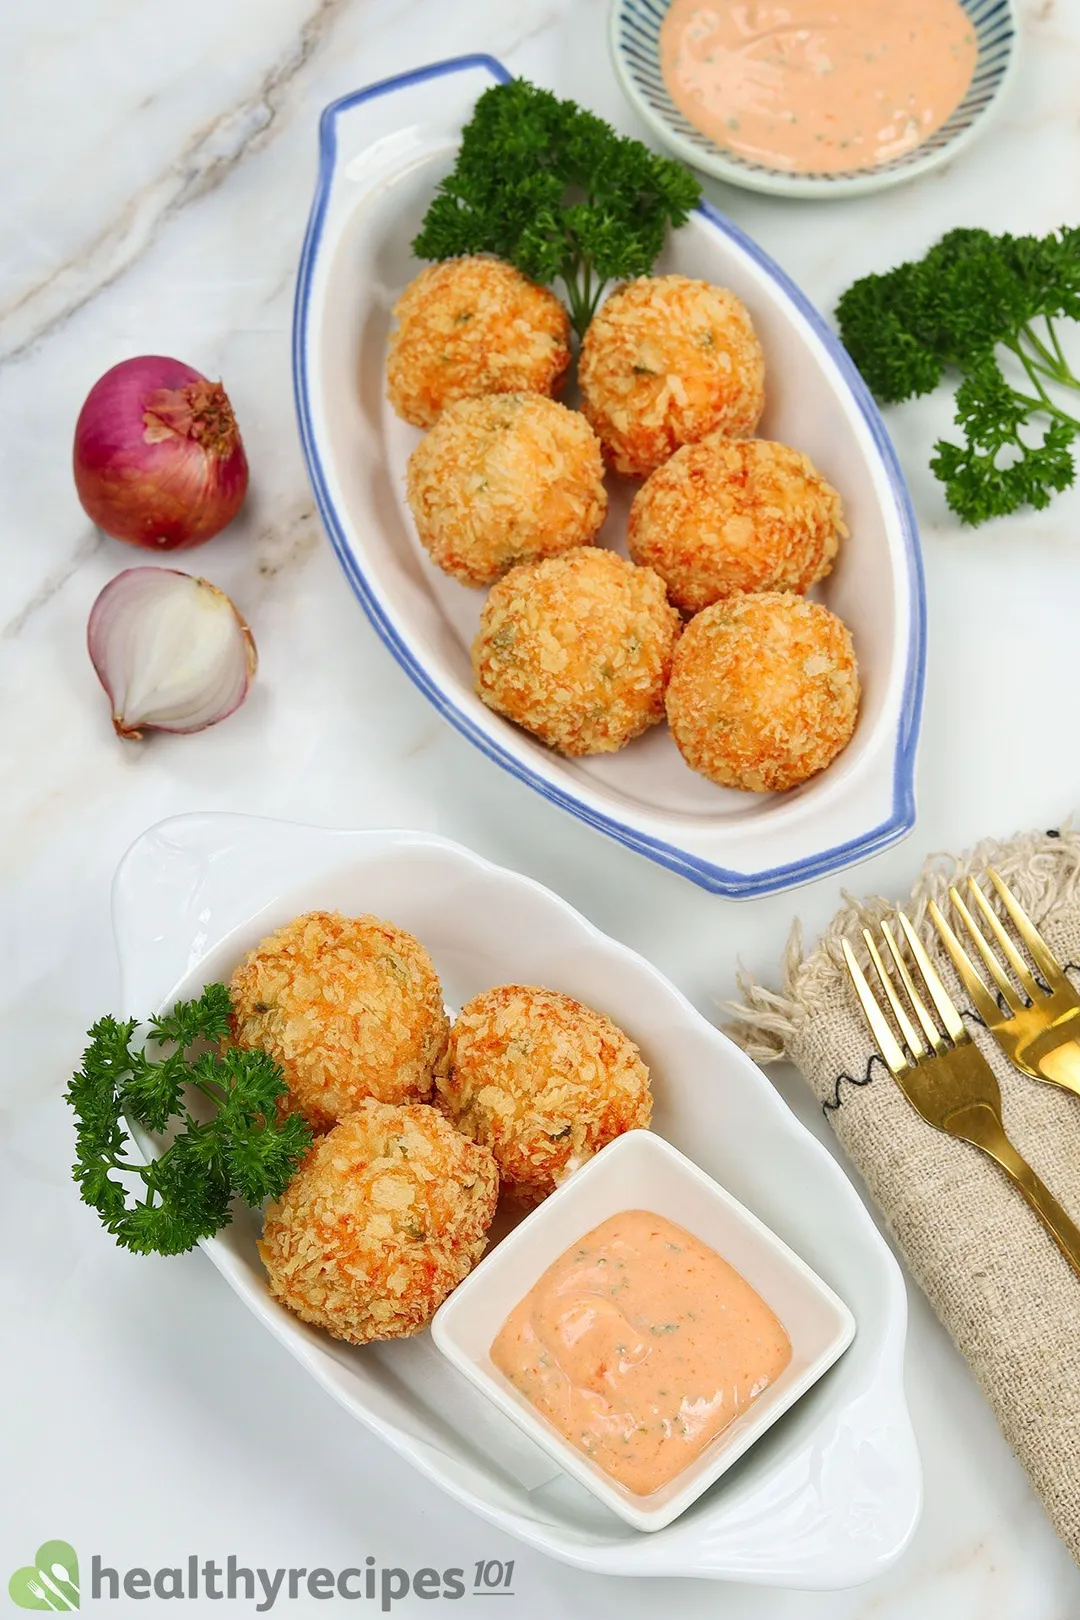 How to Store and Reheat the Leftovers shrimp balls